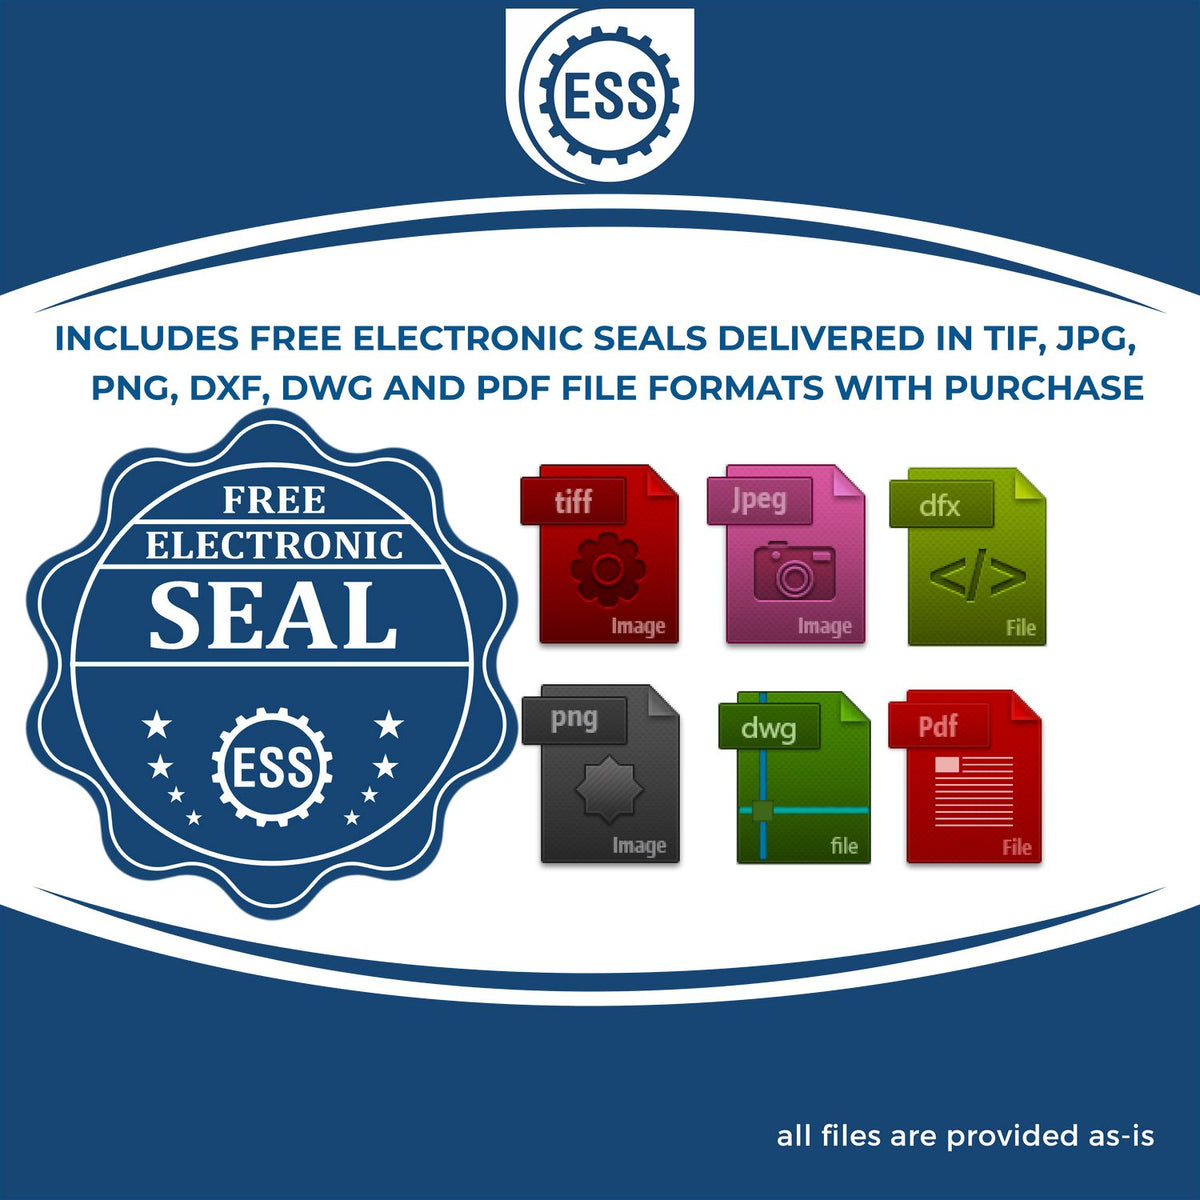 An infographic for the free electronic seal for the Slim Pre-Inked Georgia Landscape Architect Seal Stamp illustrating the different file type icons such as DXF, DWG, TIF, JPG and PNG.